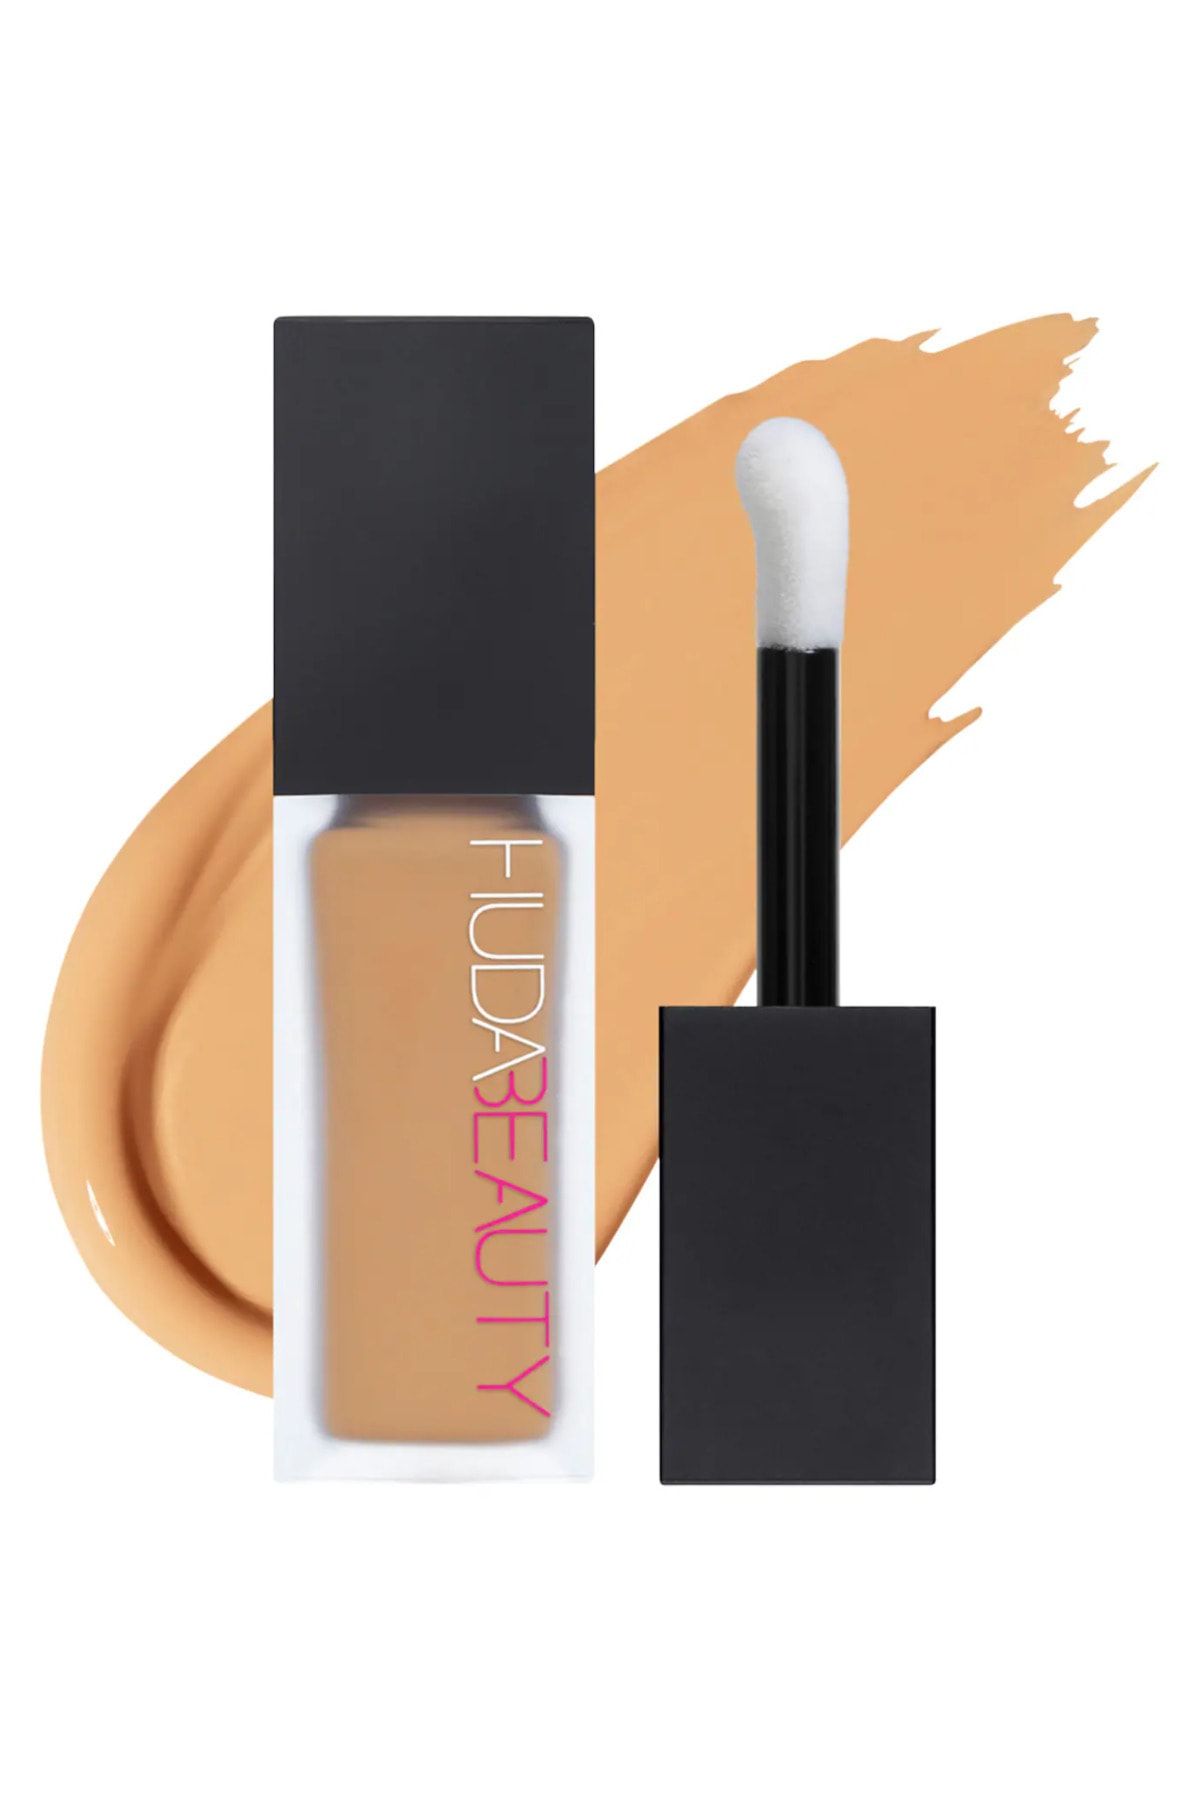 Huda Beauty FauxFilter Luminous Matte Buildable Coverage Crease Proof Concealer 9 Ml